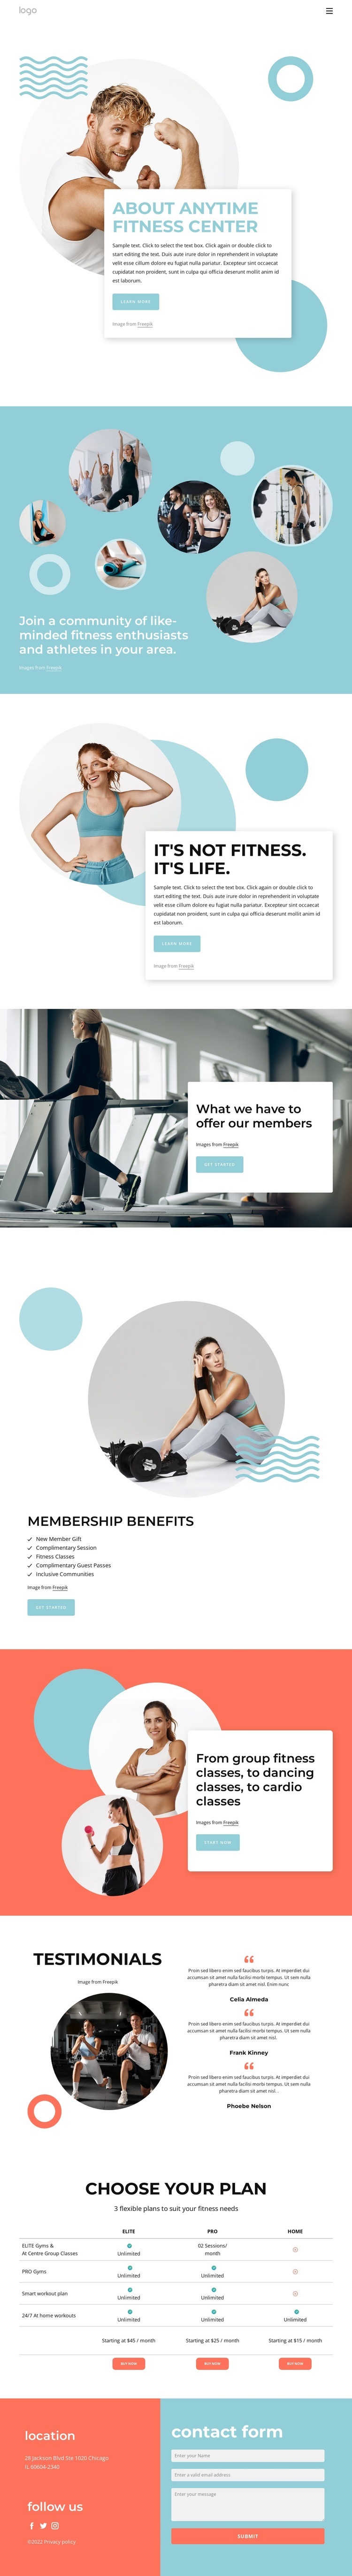 About Anytime fitness center Homepage Design